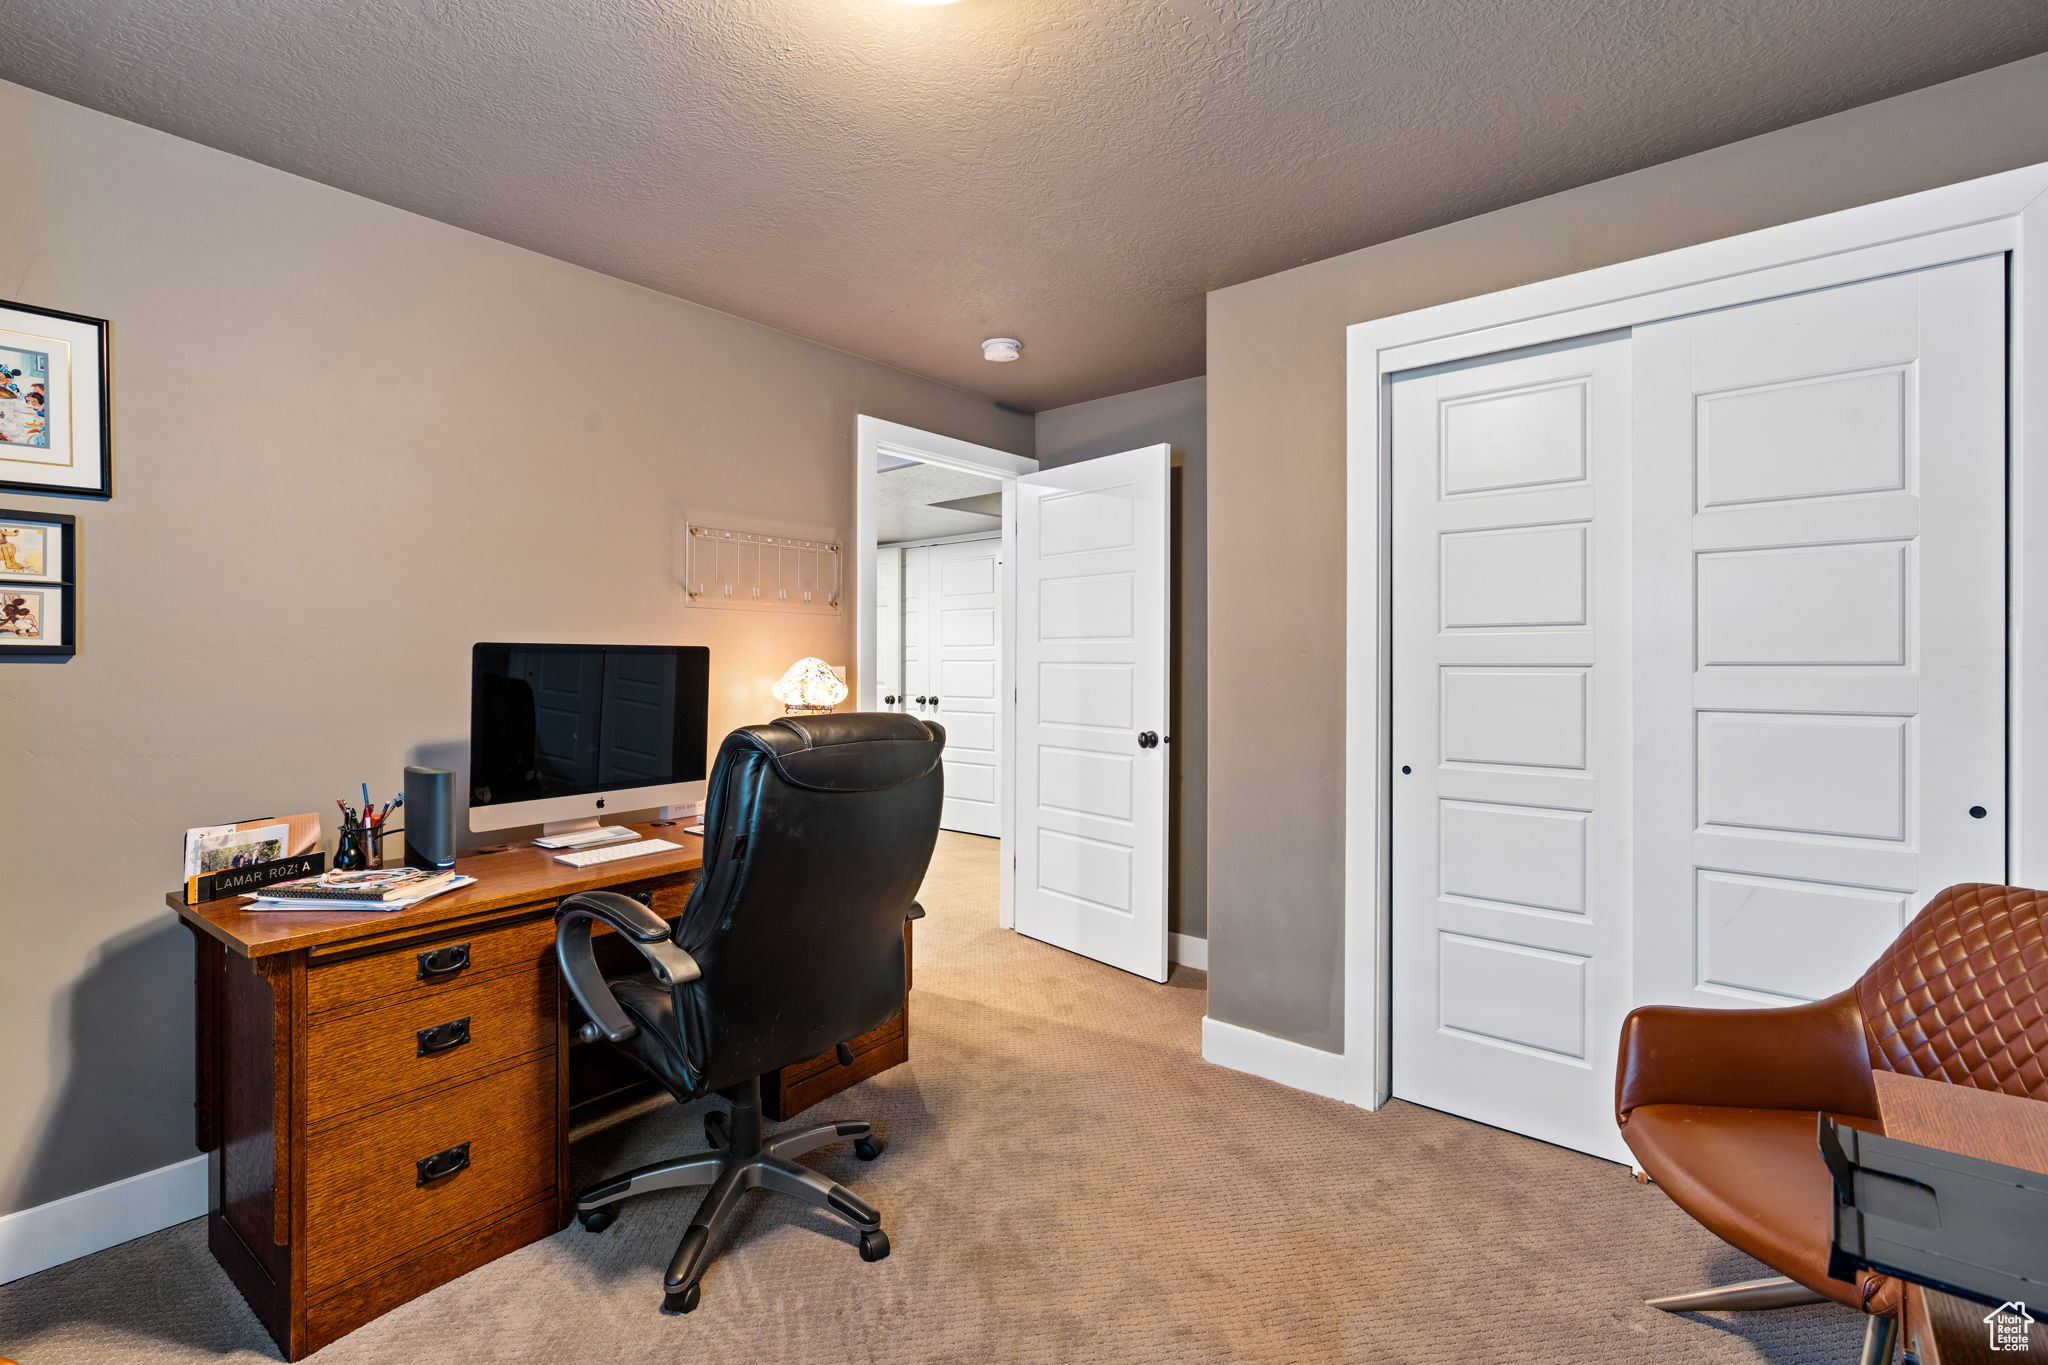 Office space featuring light colored carpet and a textured ceiling